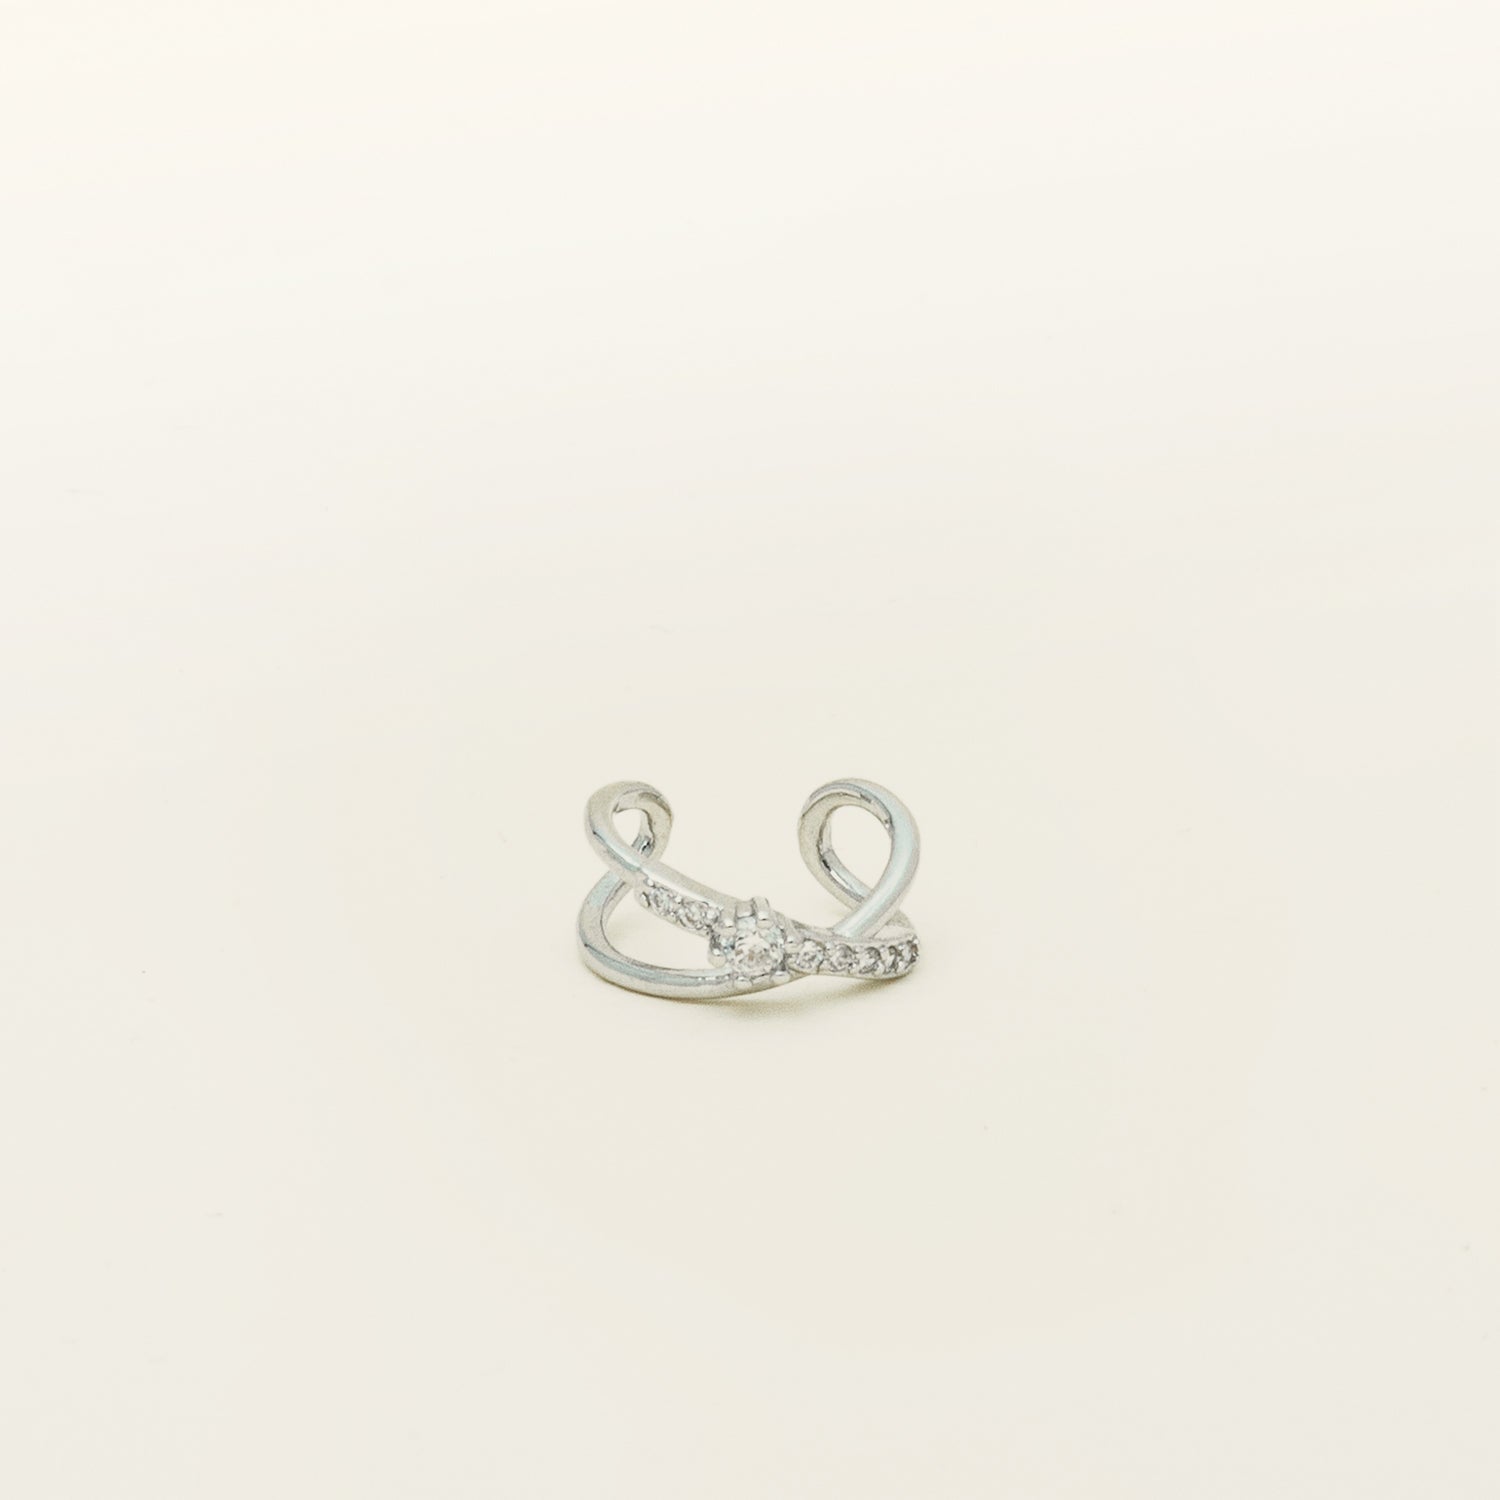 Image of the Supernova Ear Cuff, a sophisticated and stylish statement piece. Crafted from premium Sterling Silver (S925) in an elegant X shape, it boasts a prominent zirconia centerpiece and a row of smaller stones. This versatile accessory is perfect for the modern man or woman, exuding a touch of luxury and contemporary charm.